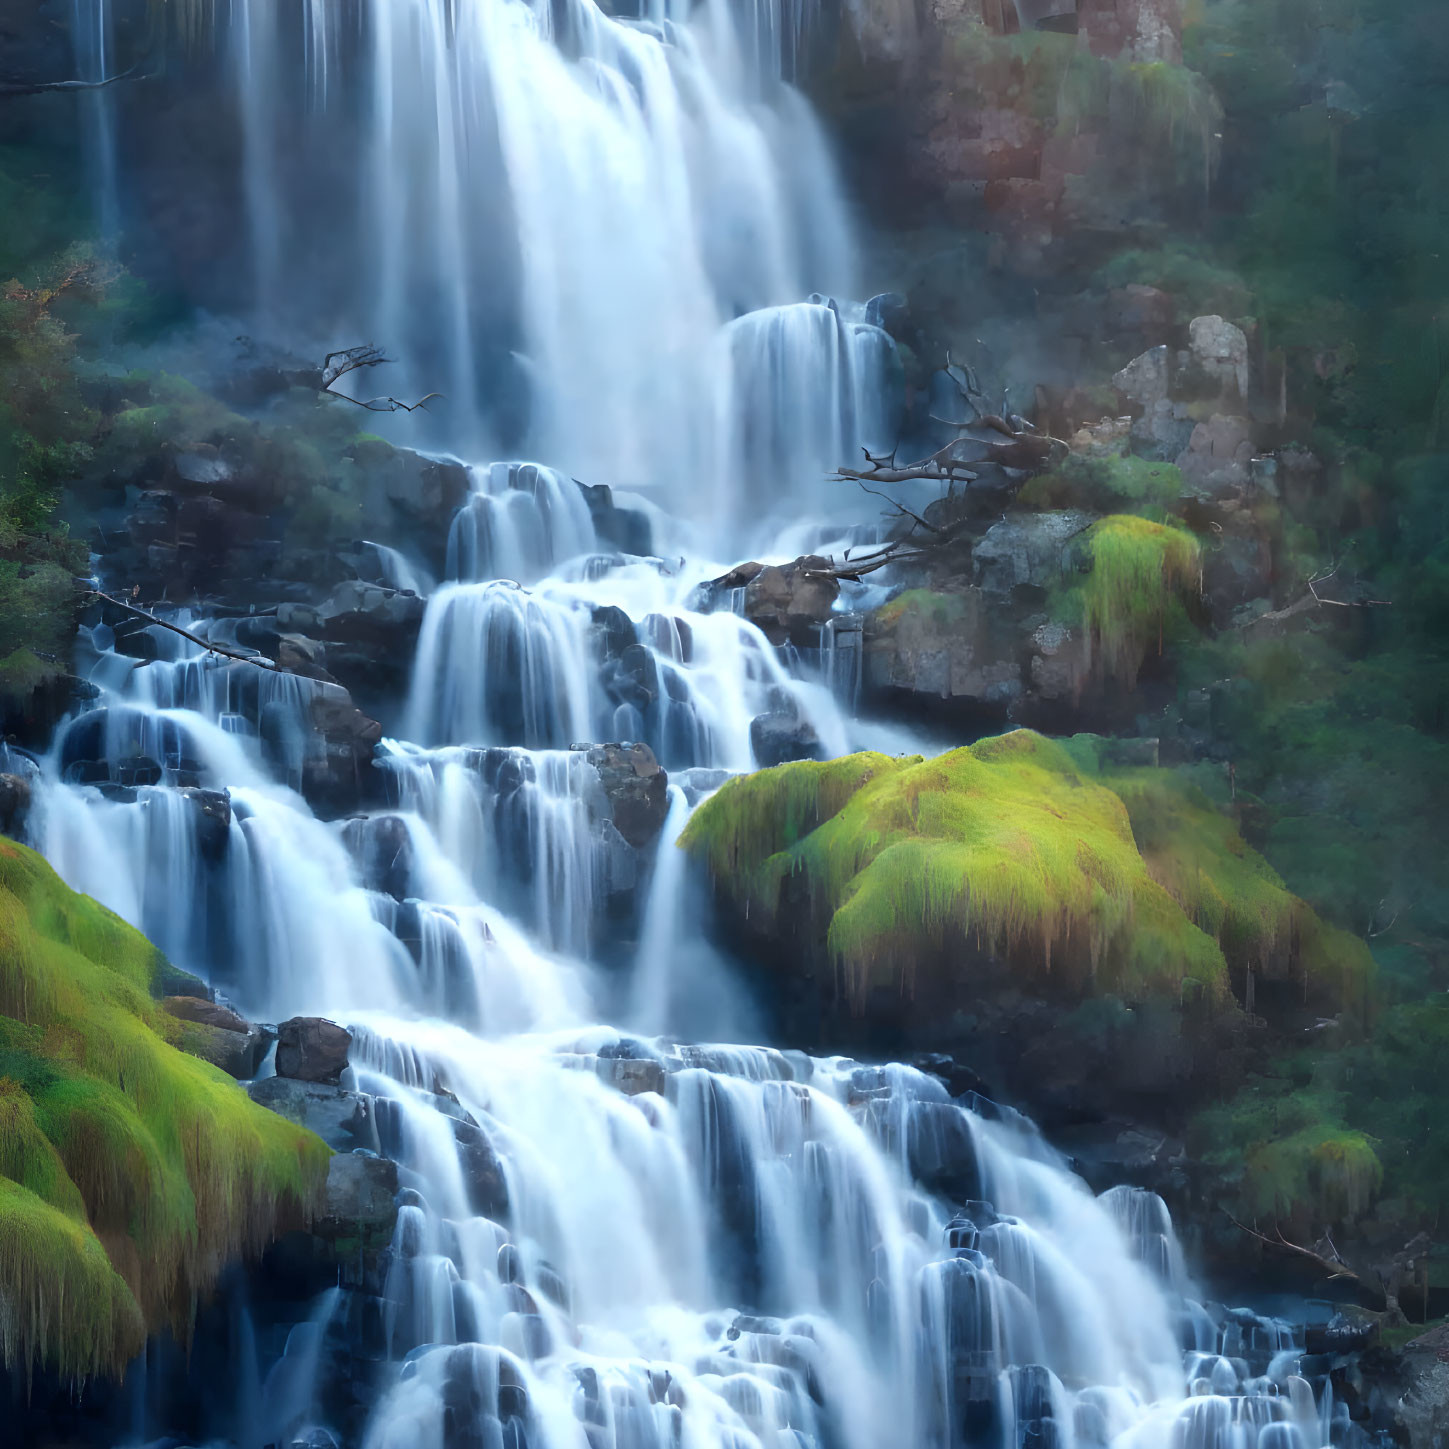 Moss-Covered Rocks in Ethereal Forest with Cascading Waterfall